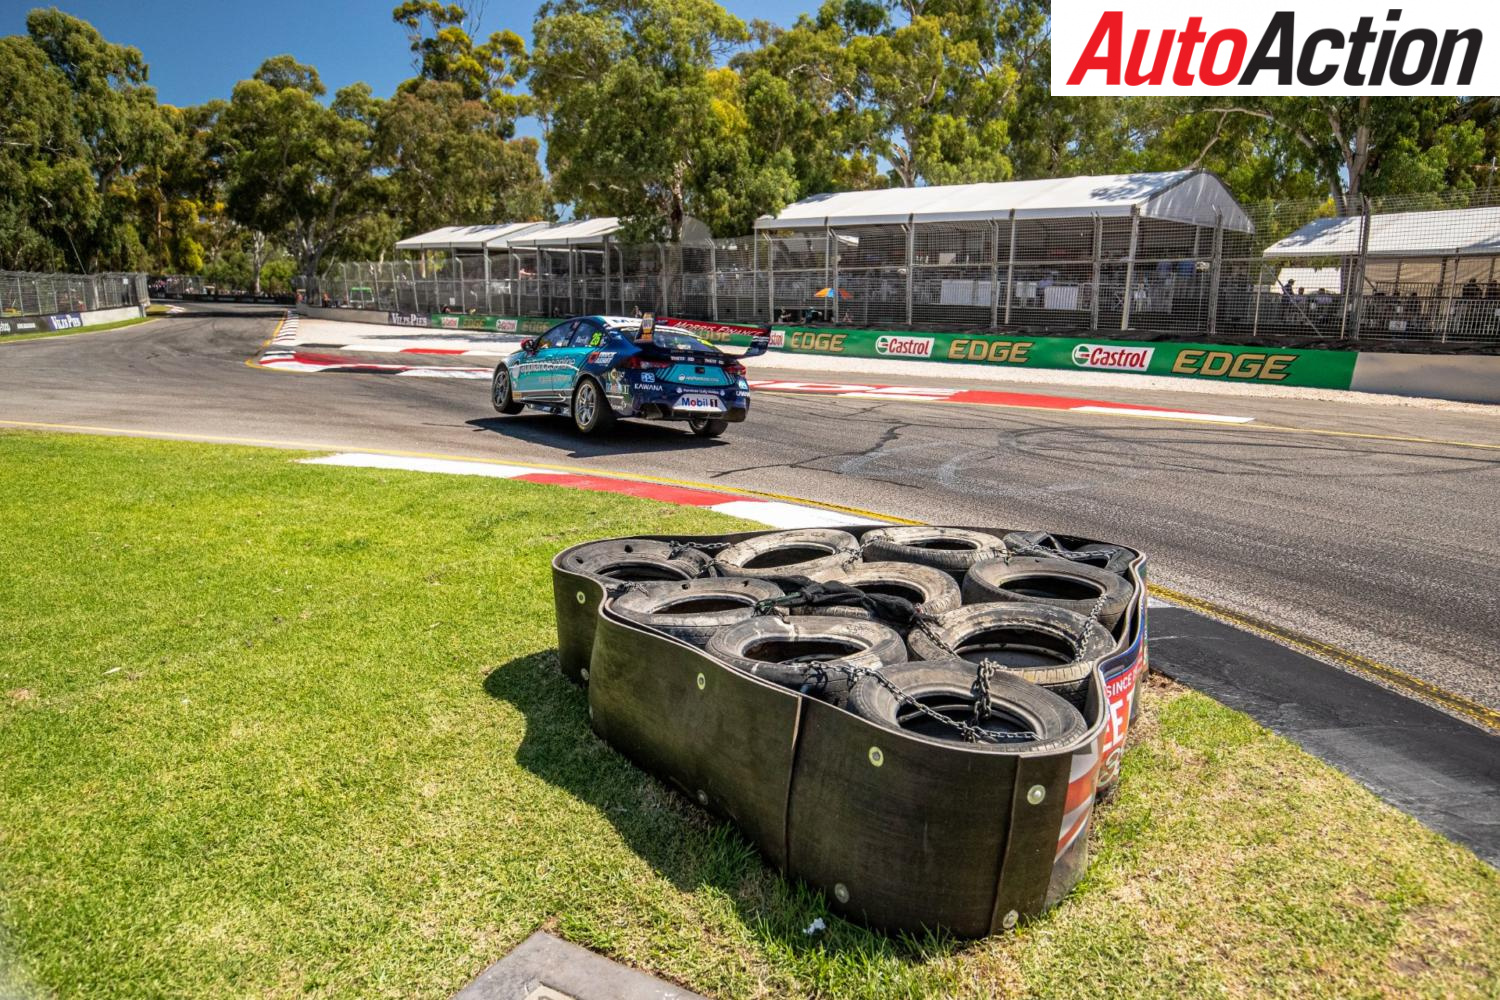 Adelaide Street Circuit 'very unlikely' to host anymore racing - Photo: InSyde Media